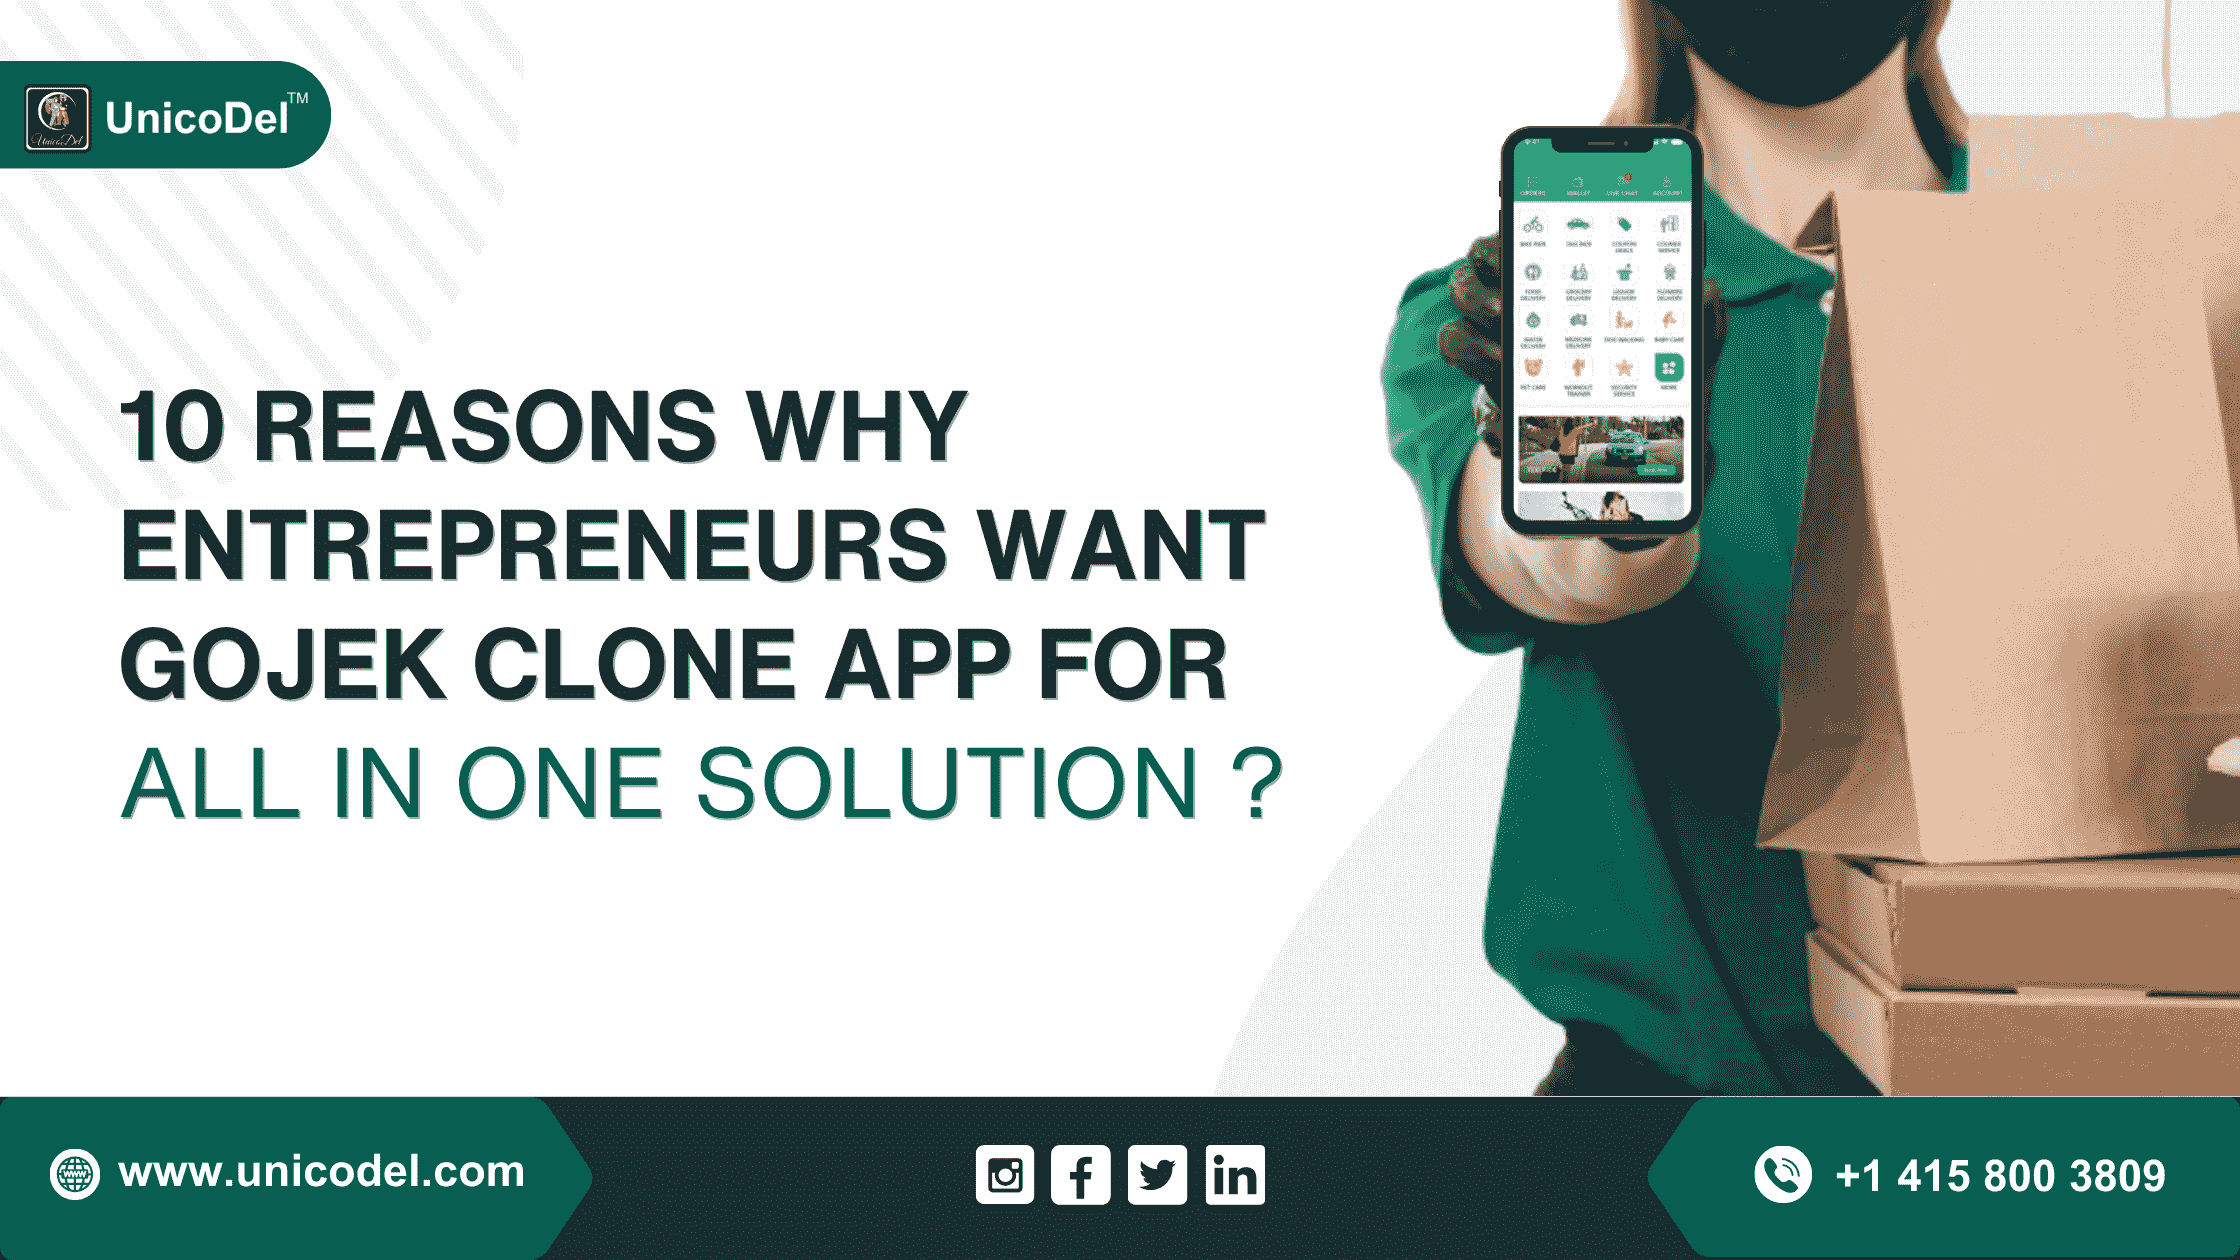 10 Reasons Why Entrepreneurs Want Gojek Clone App for All-One Solution